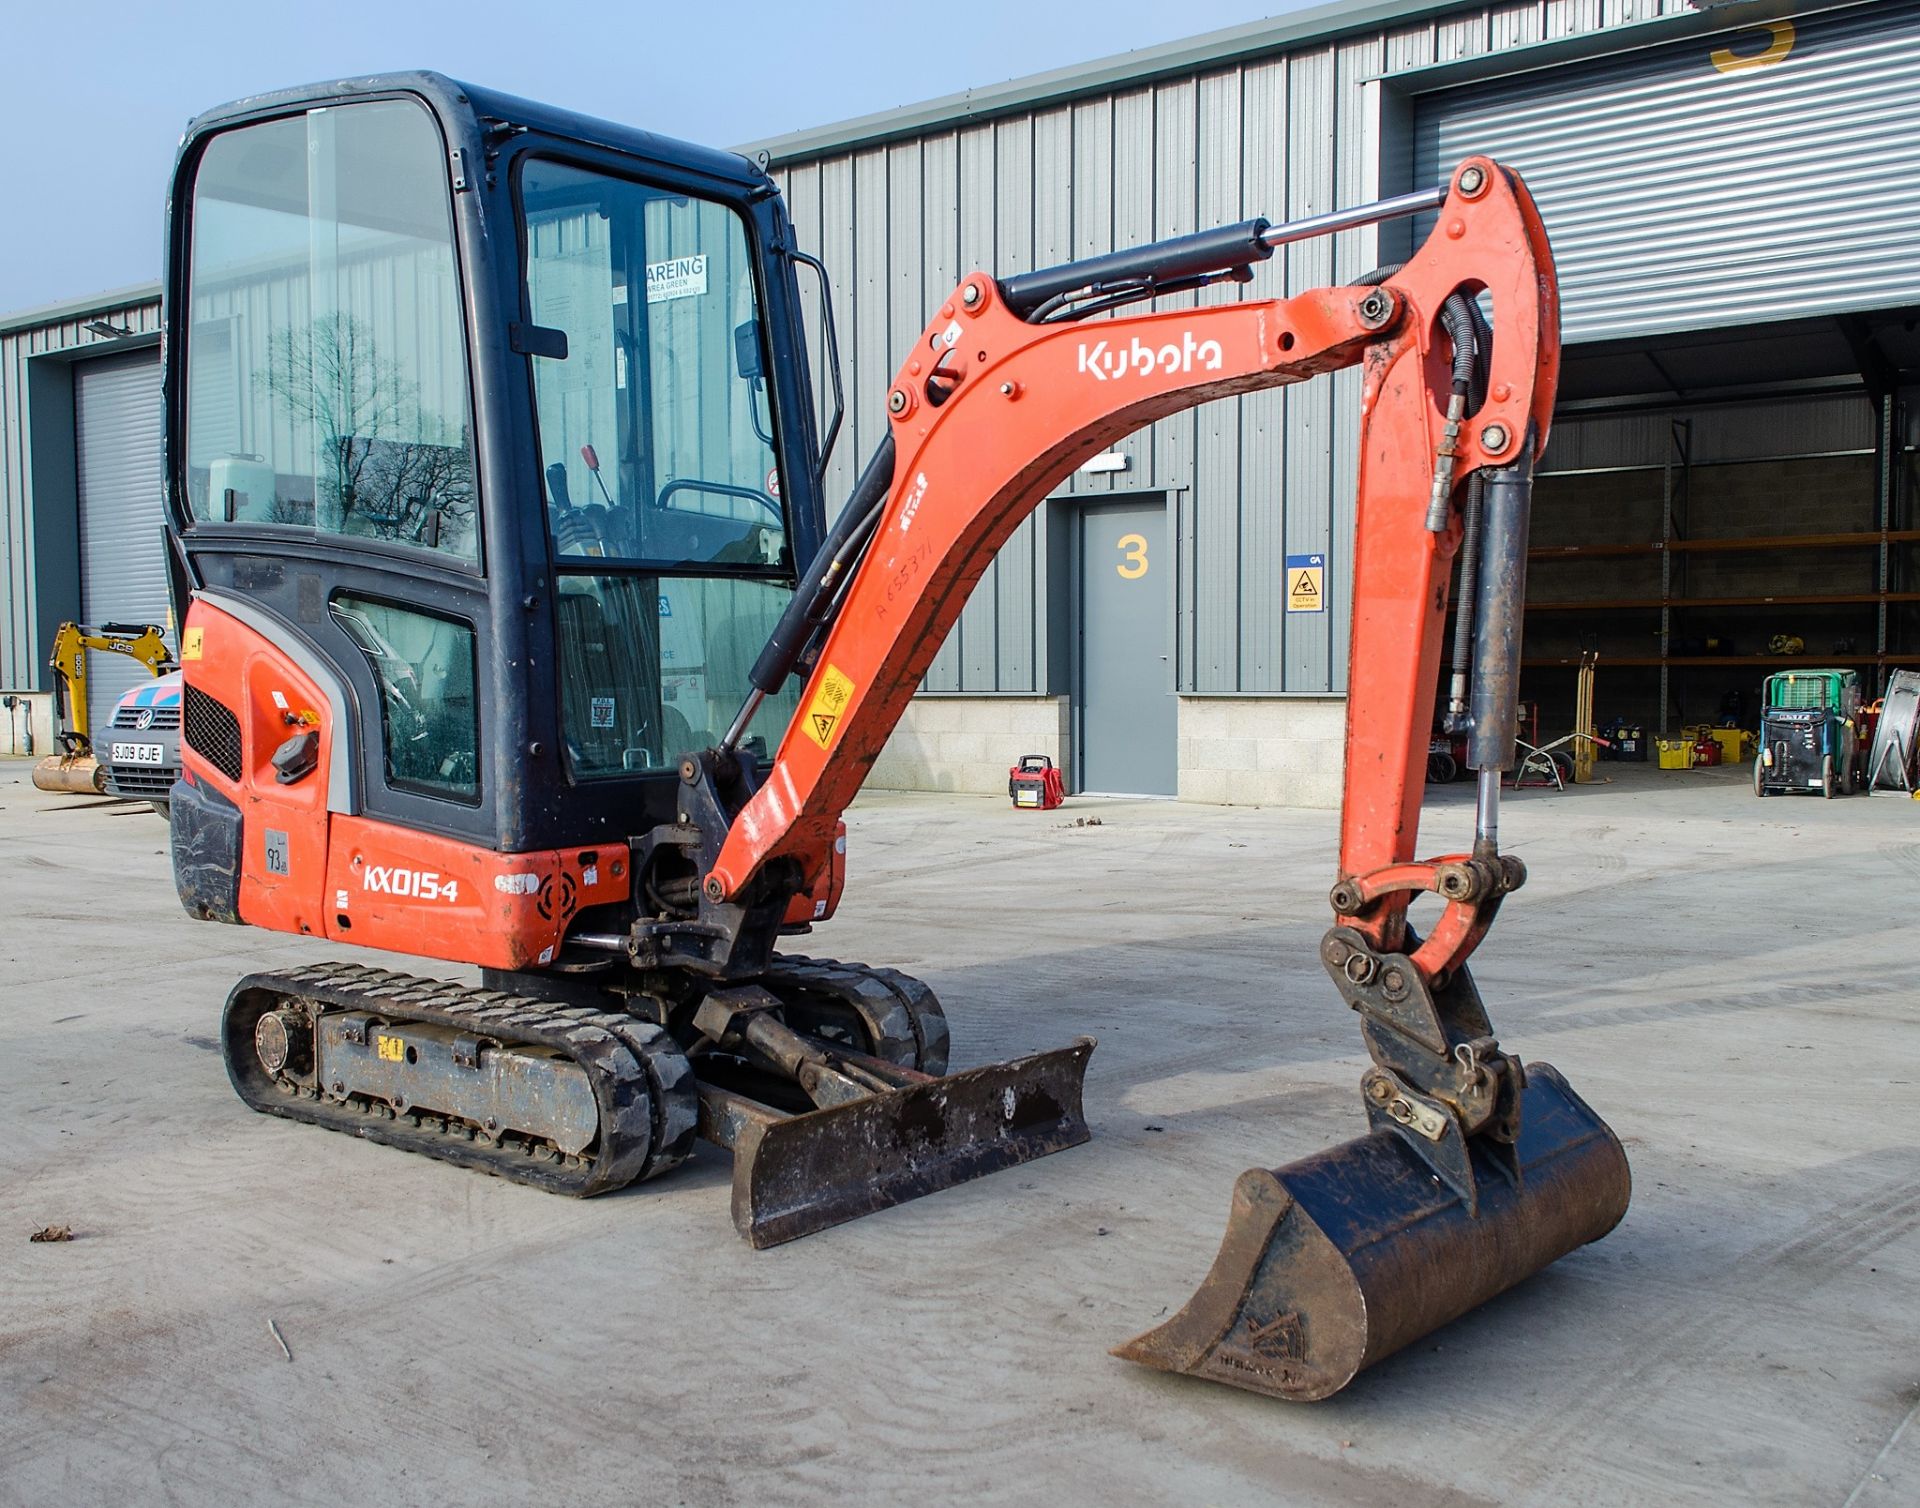 Kubota KX015-4 1.5 tonne rubber tracked excavator Year: 2014 S/N: 58181 Recorded Hours: 1616 - Image 2 of 21